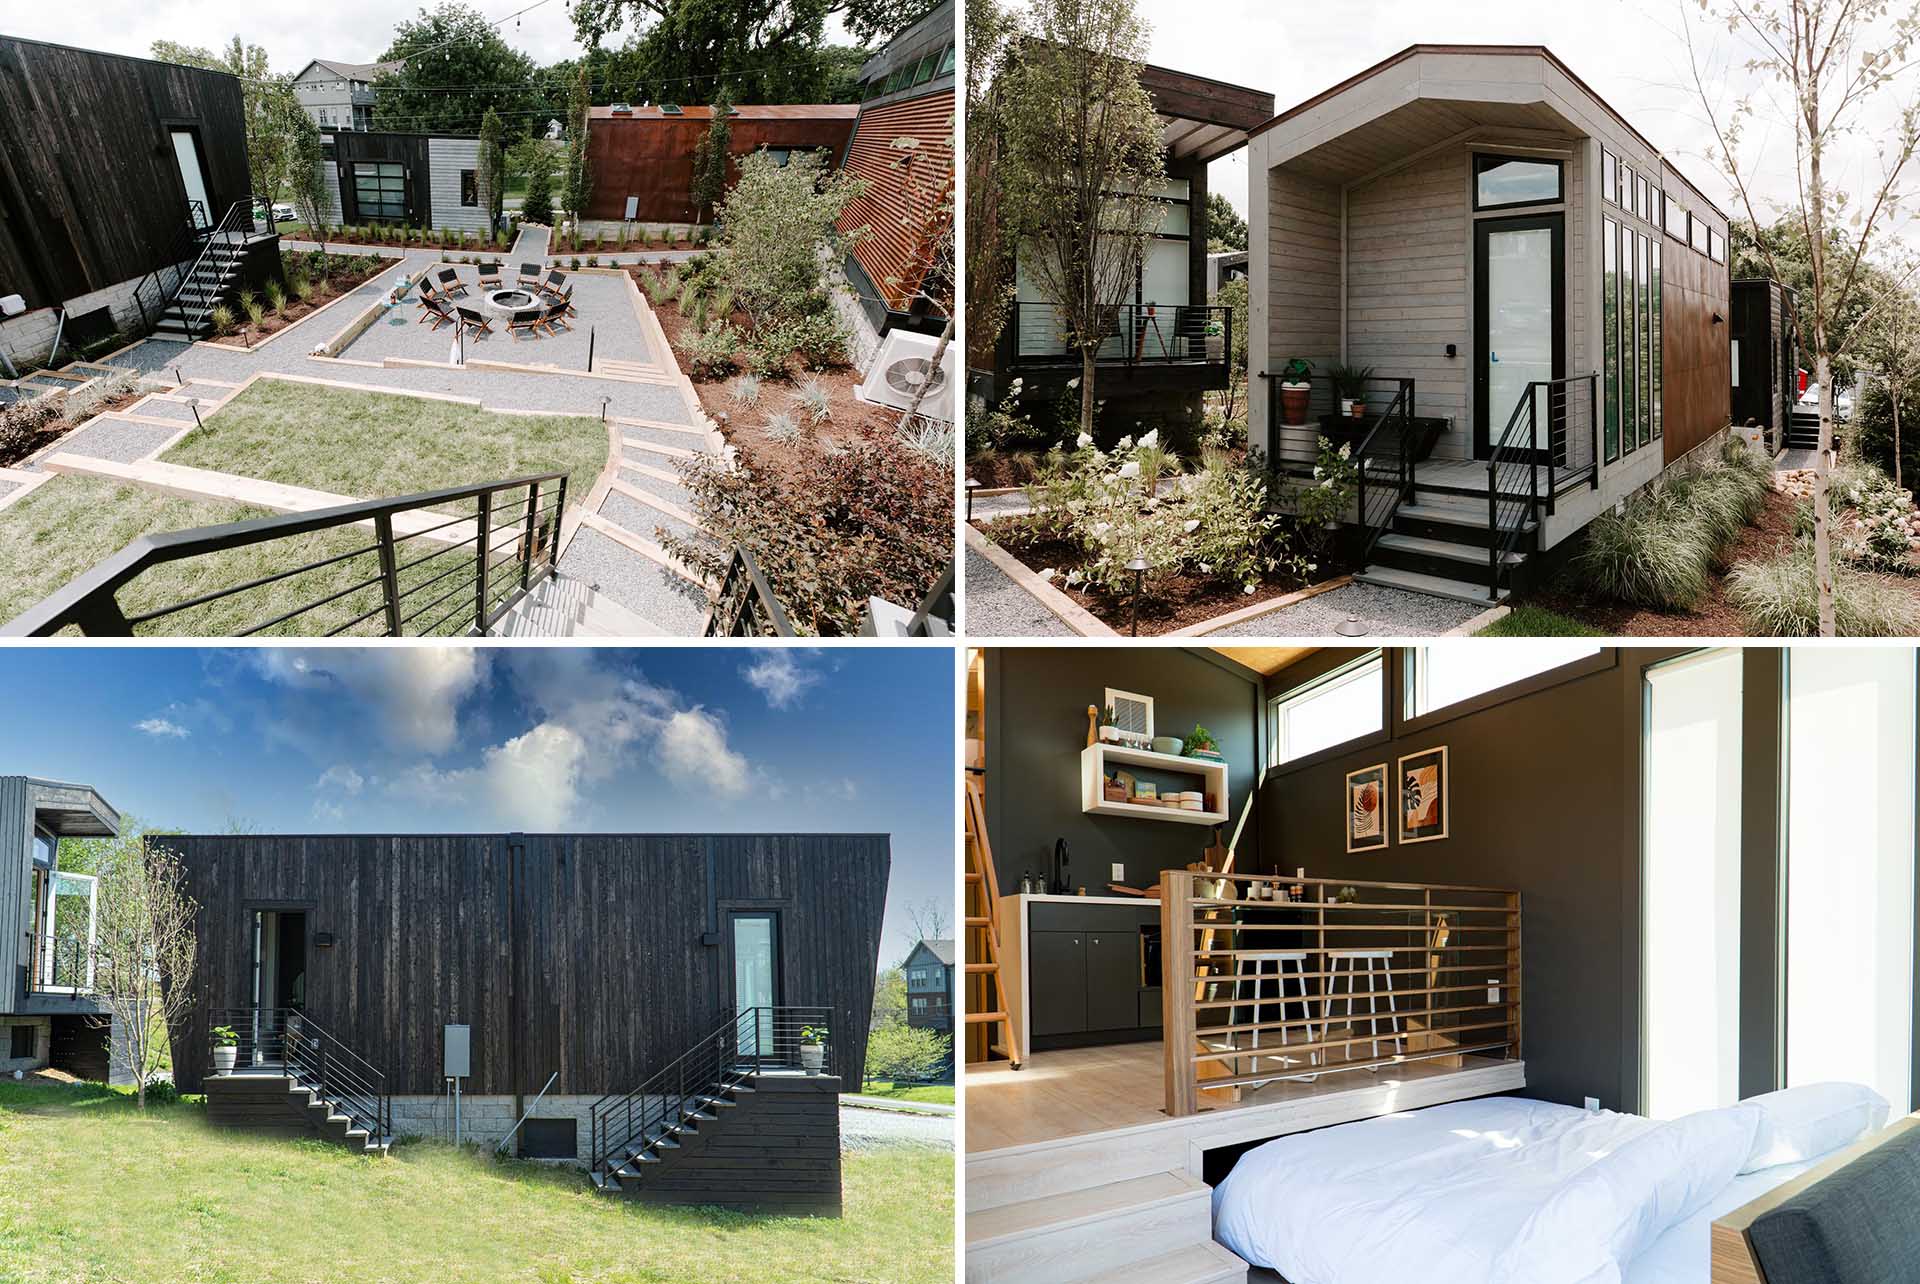 Located in Nashville, Tennessee, Ironwood Grove is a community of 6 tiny homes that have been turned into a small hotel.